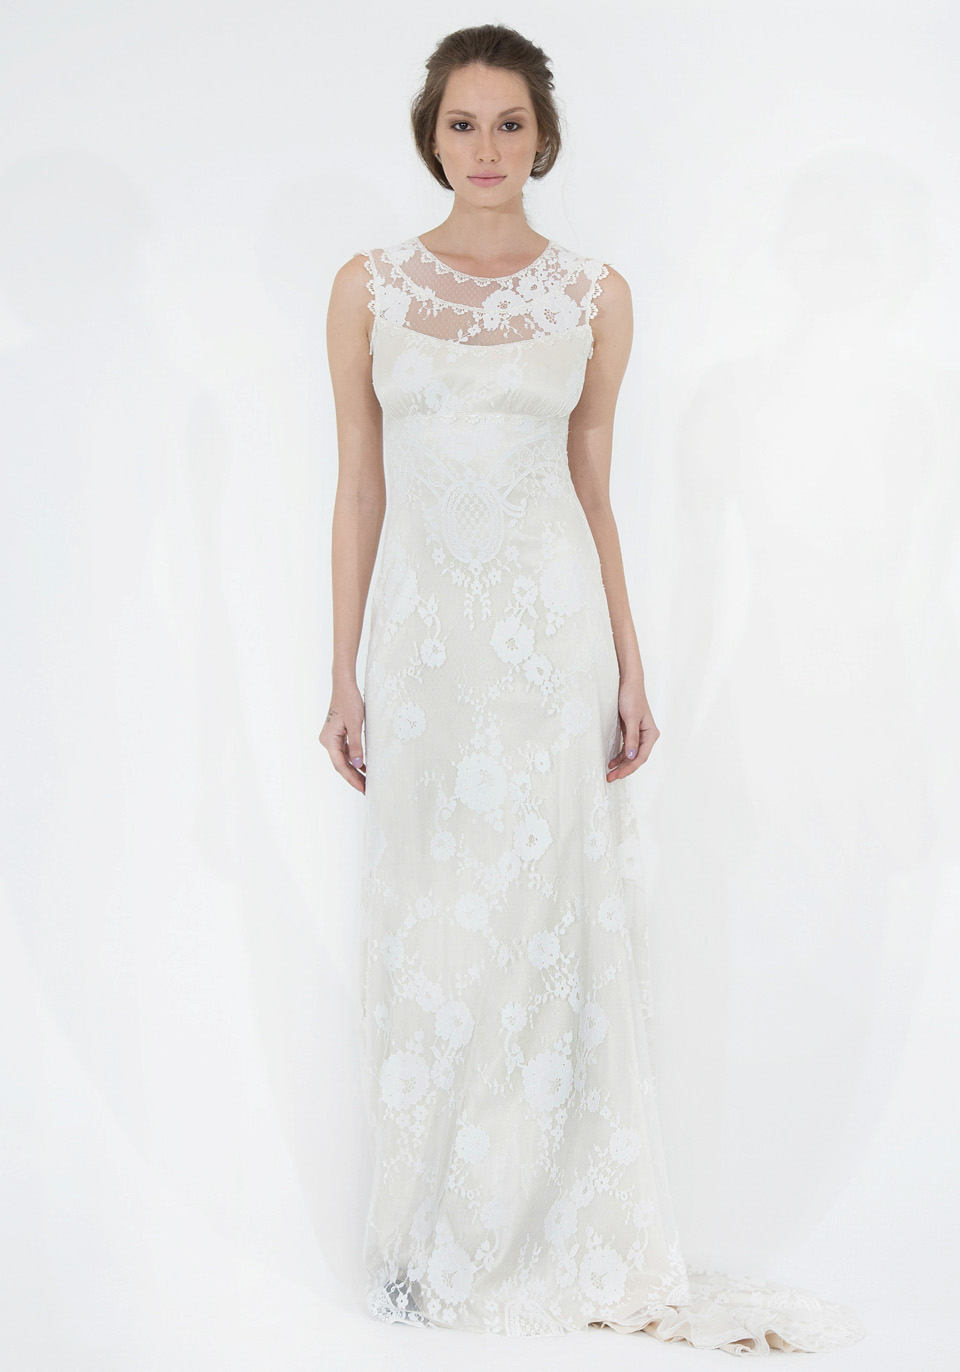 'Into the Sunset' - Claire Pettibone's 'Romantique' Collection for 2016 ...